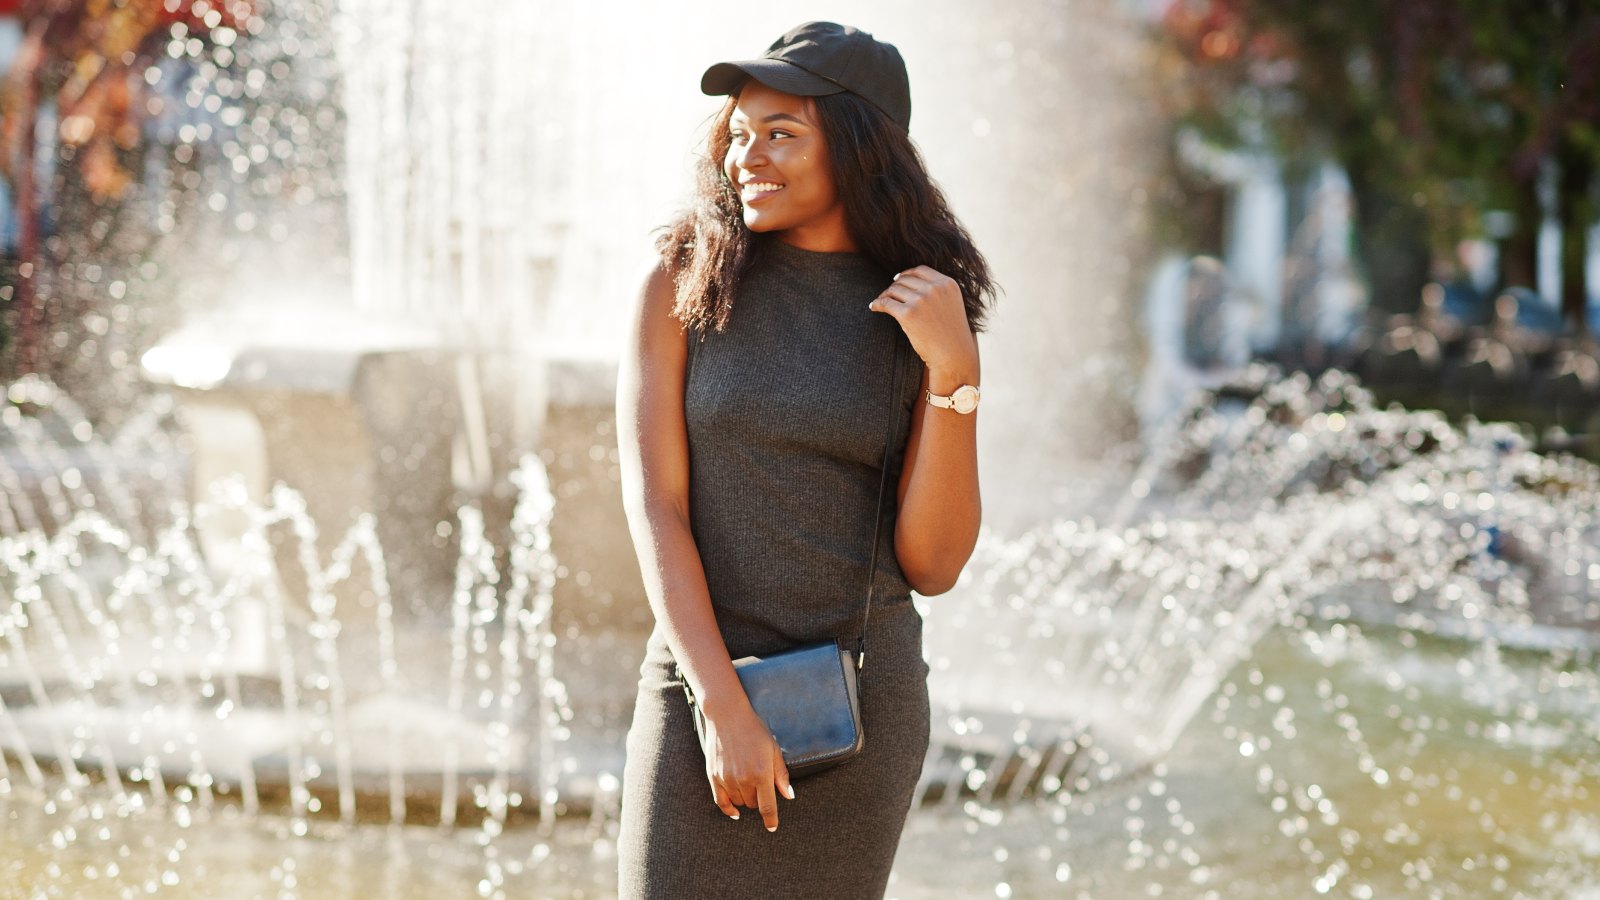 Go Hands-Free With These Stylish Crossbody And Messenger Bags